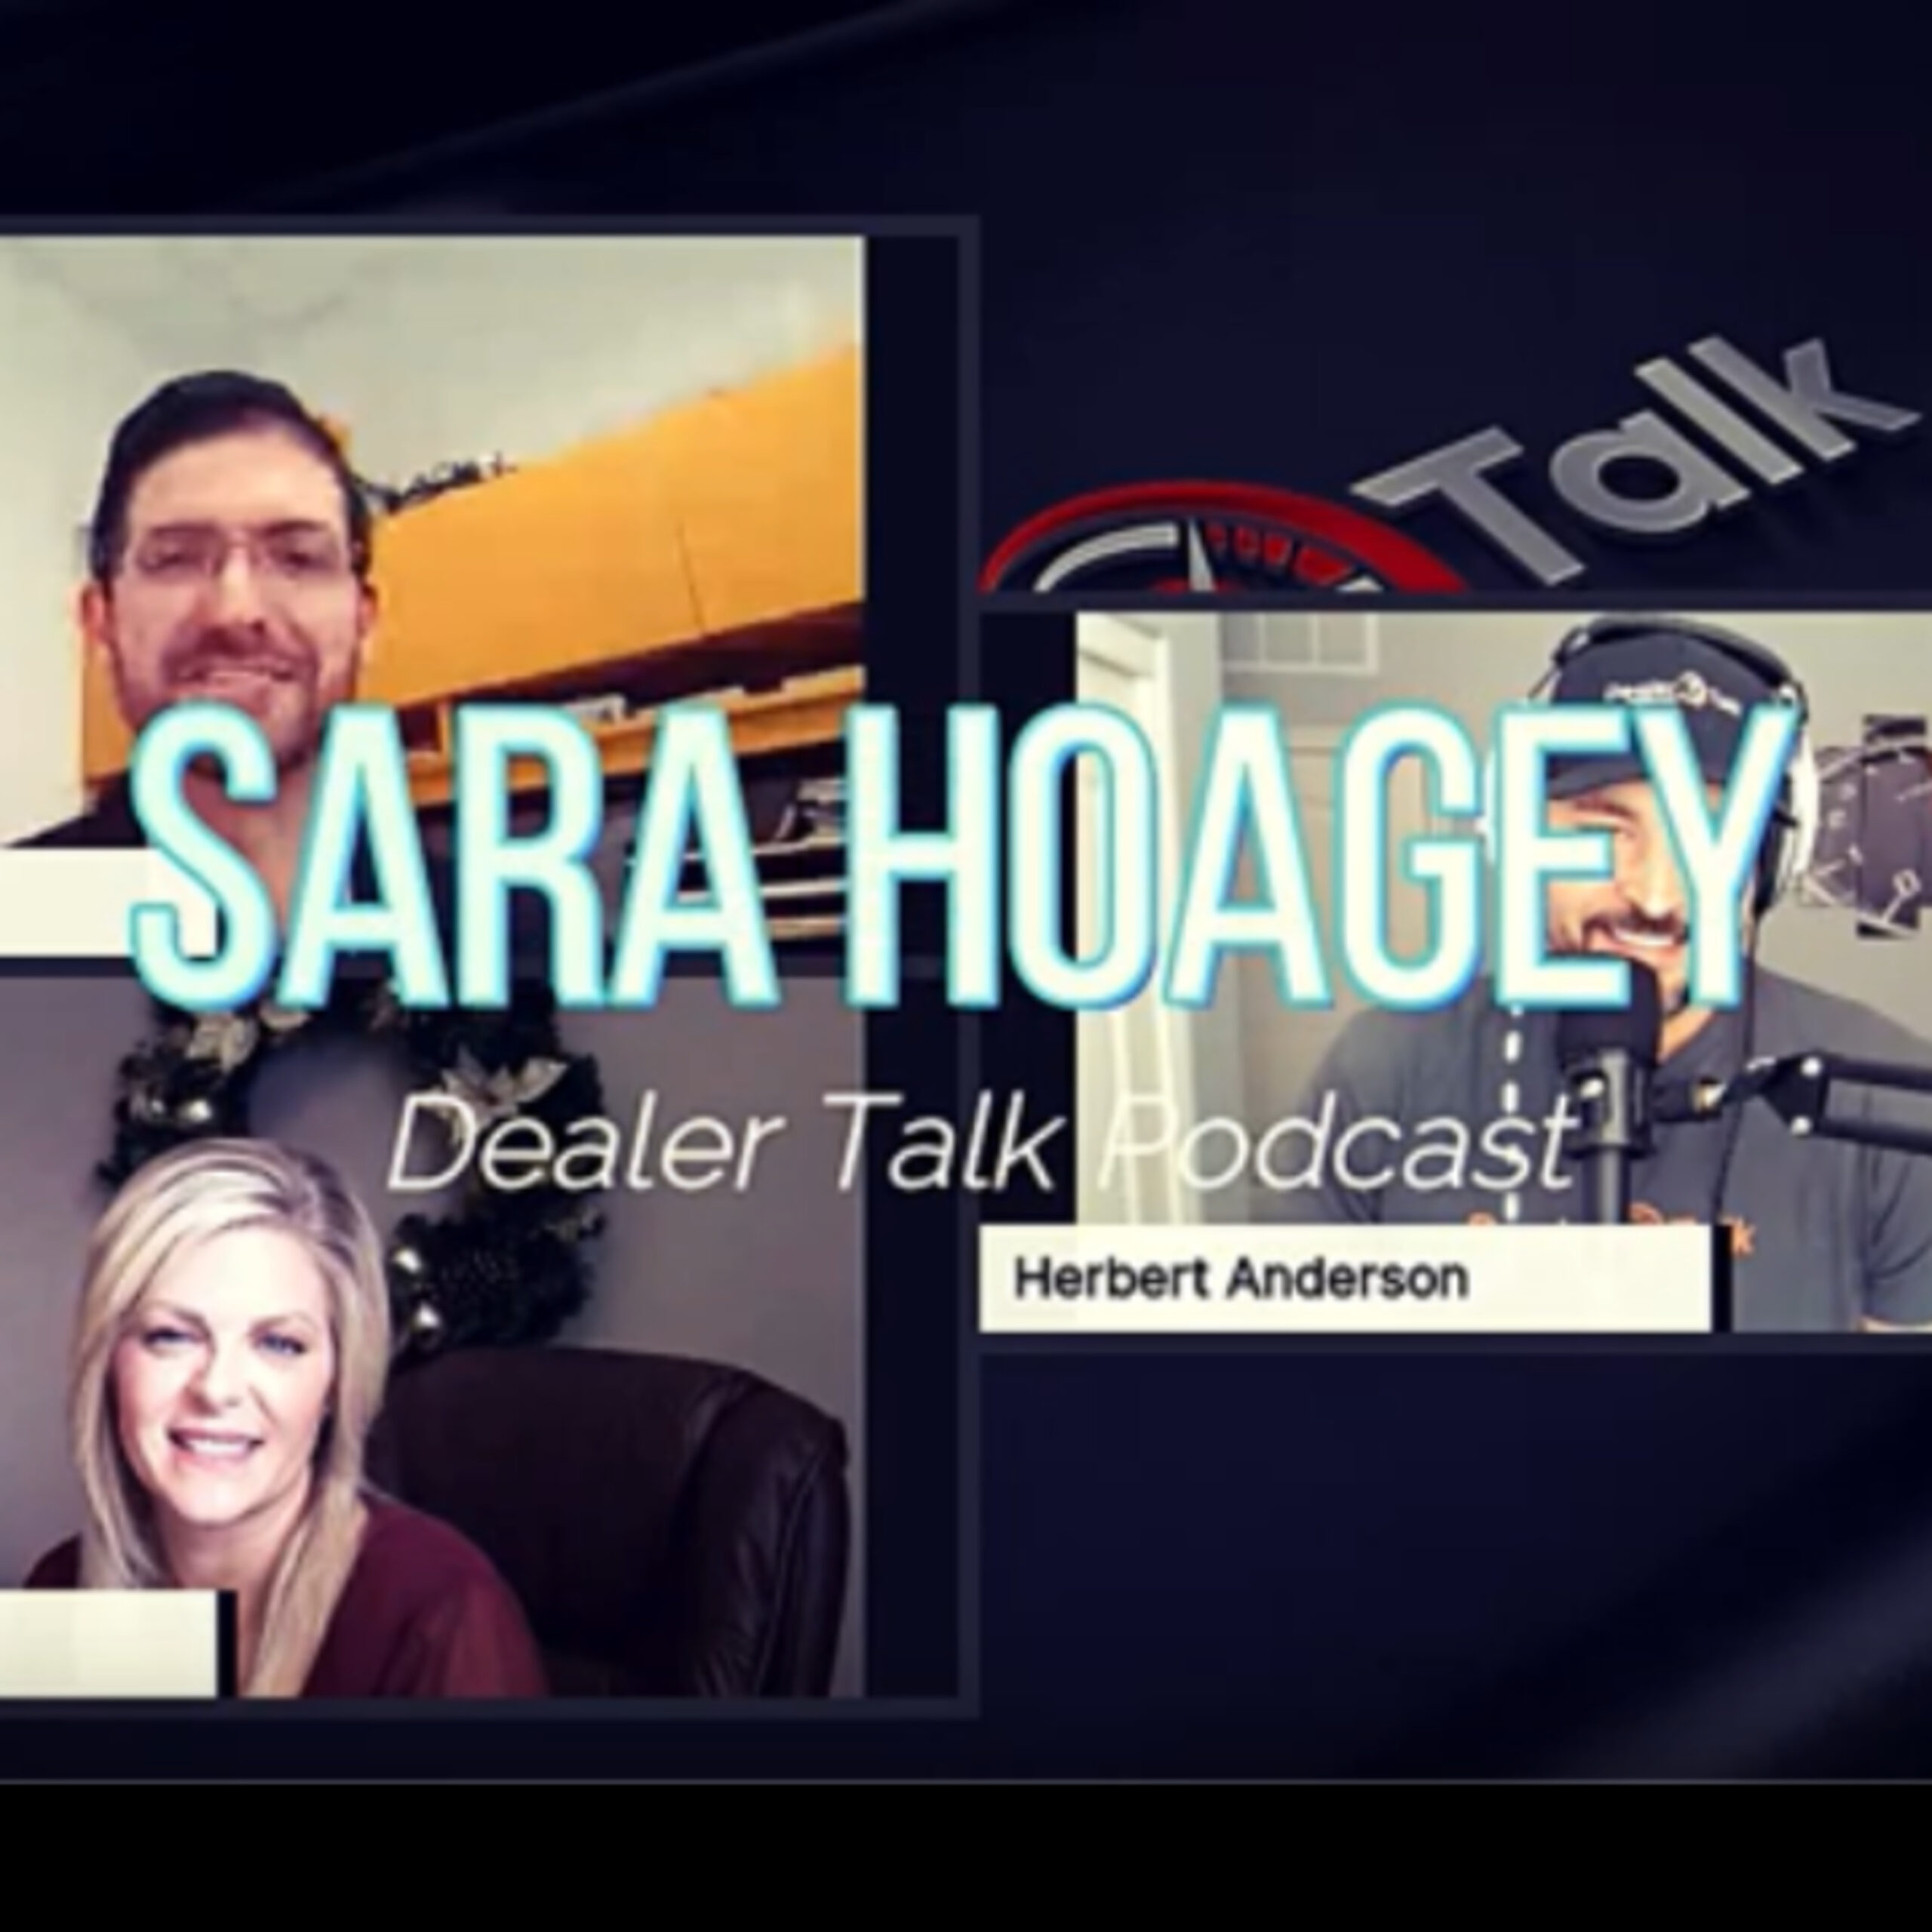 You are currently viewing Sara Hoagey – To BDC or Not to BDC?